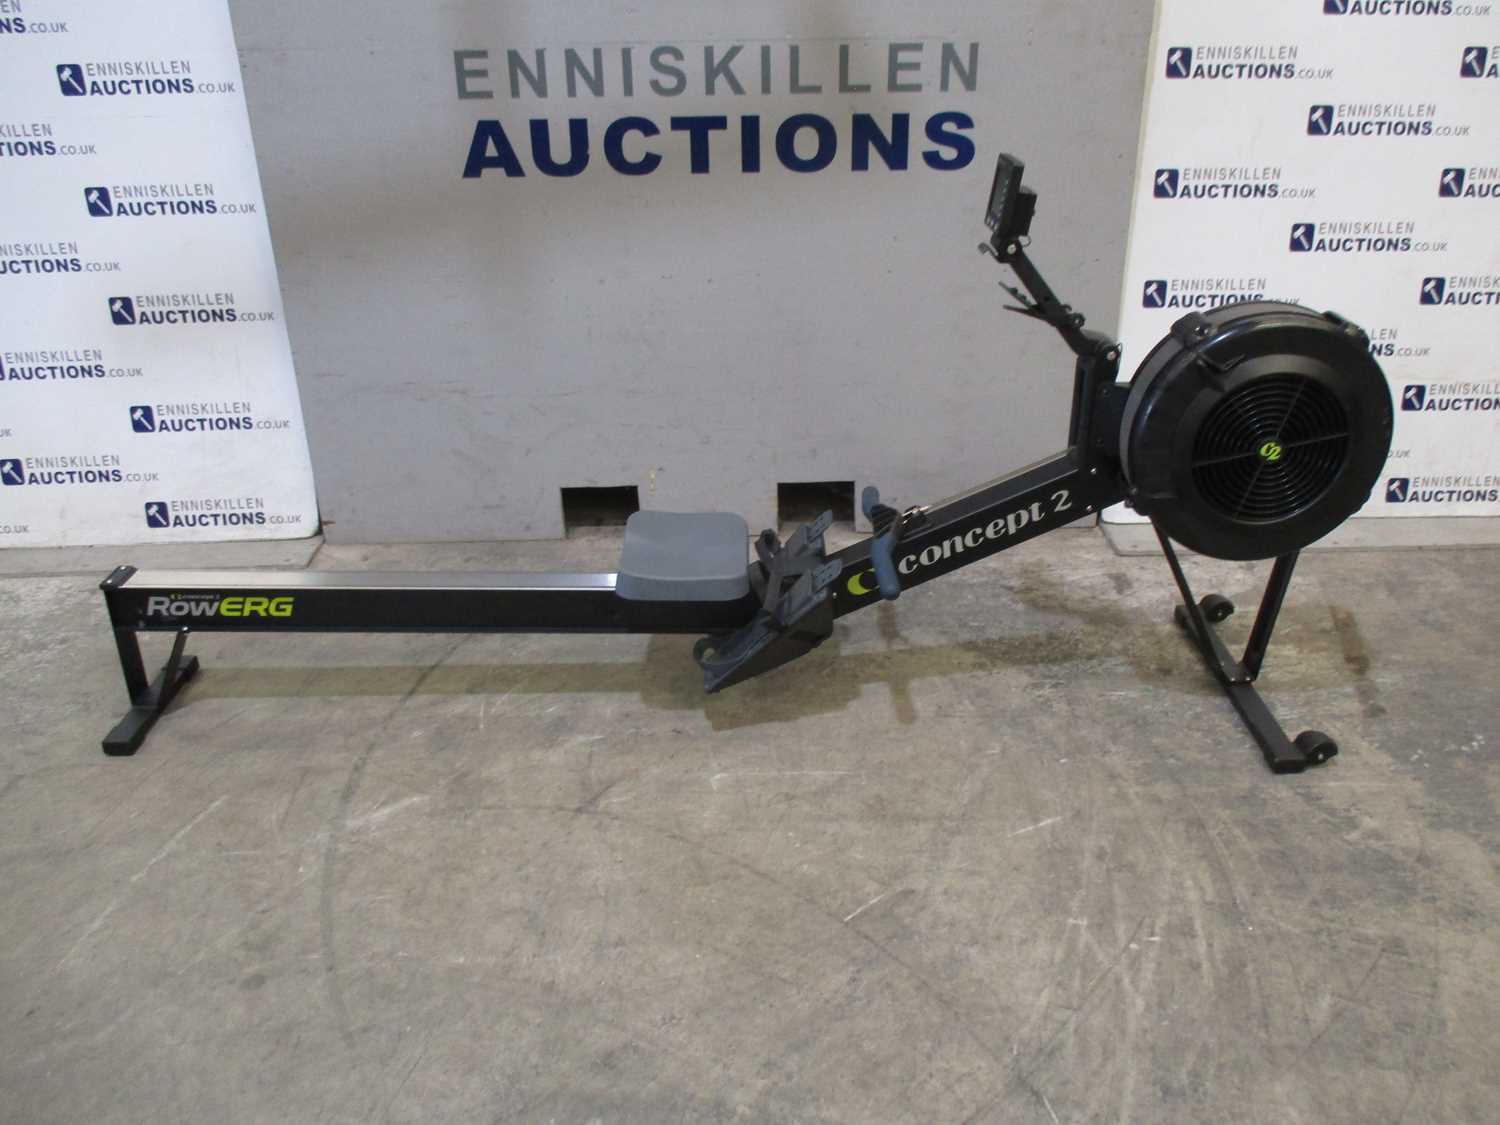 100 - CONCEPT 2 ROWERG WITH PM5 DISPLAY